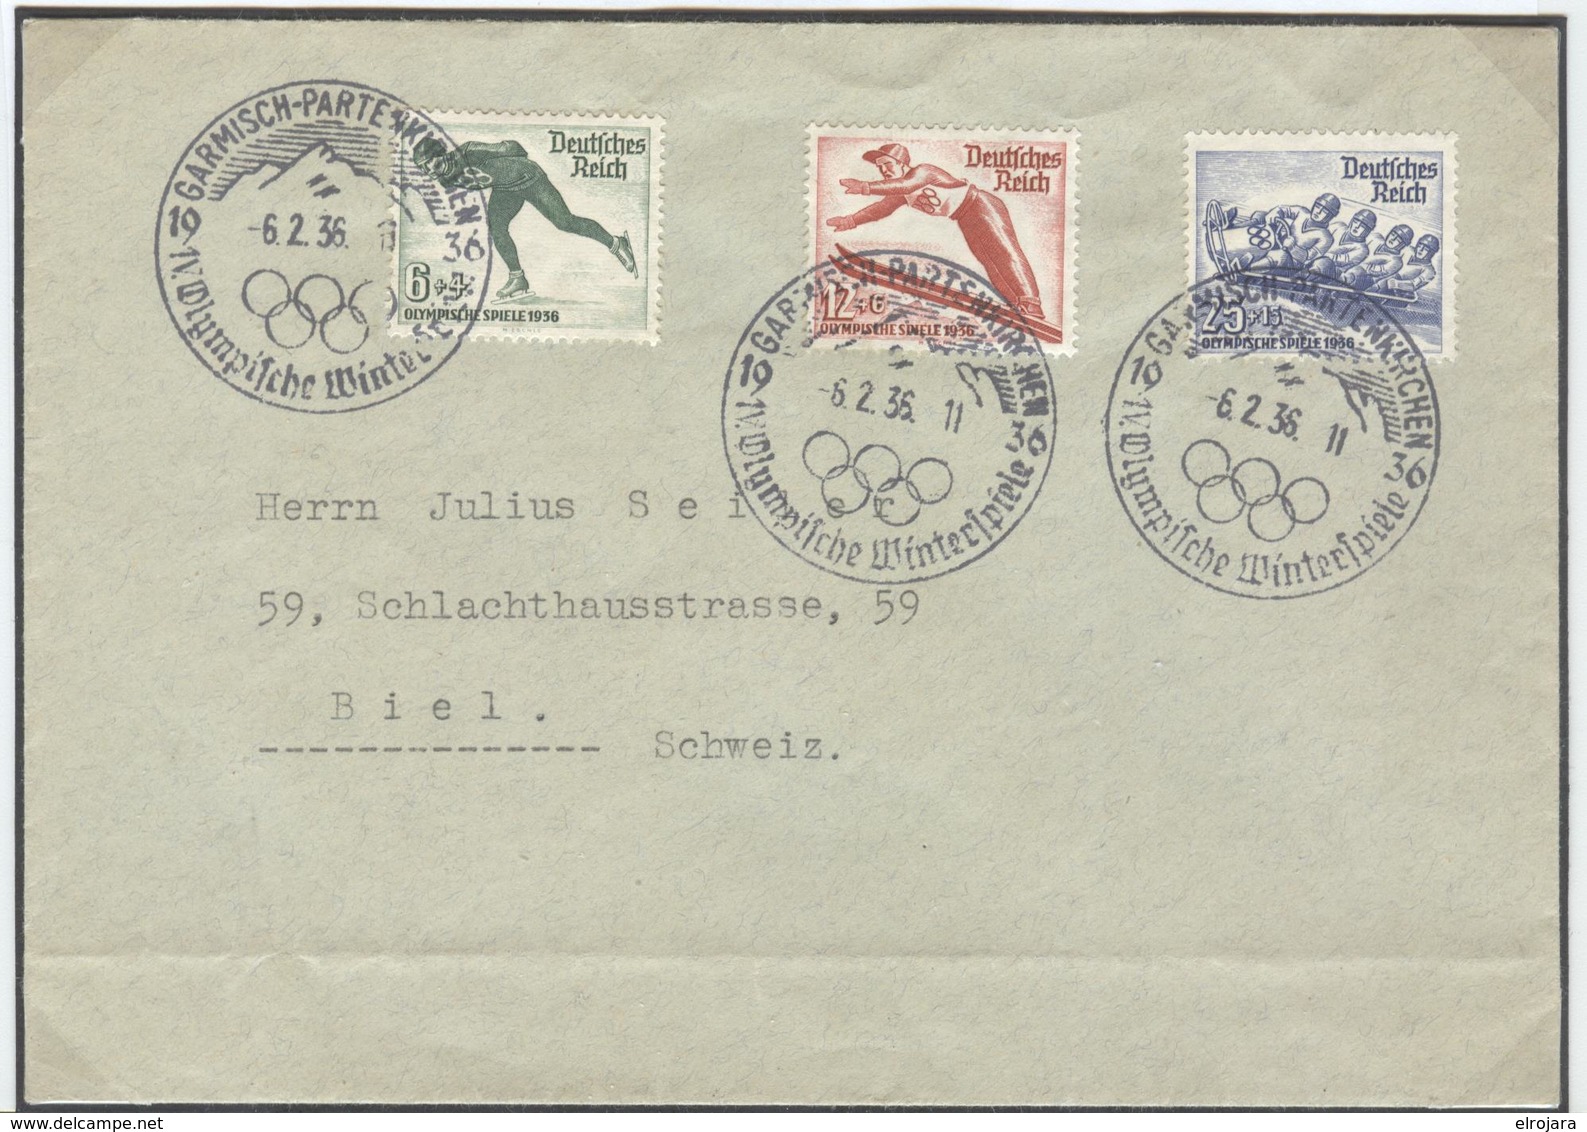 GERMANY Cover With The Complete Set With Olympic Cancel Of The Opening Day 6.2.36 11 - Winter 1936: Garmisch-Partenkirchen